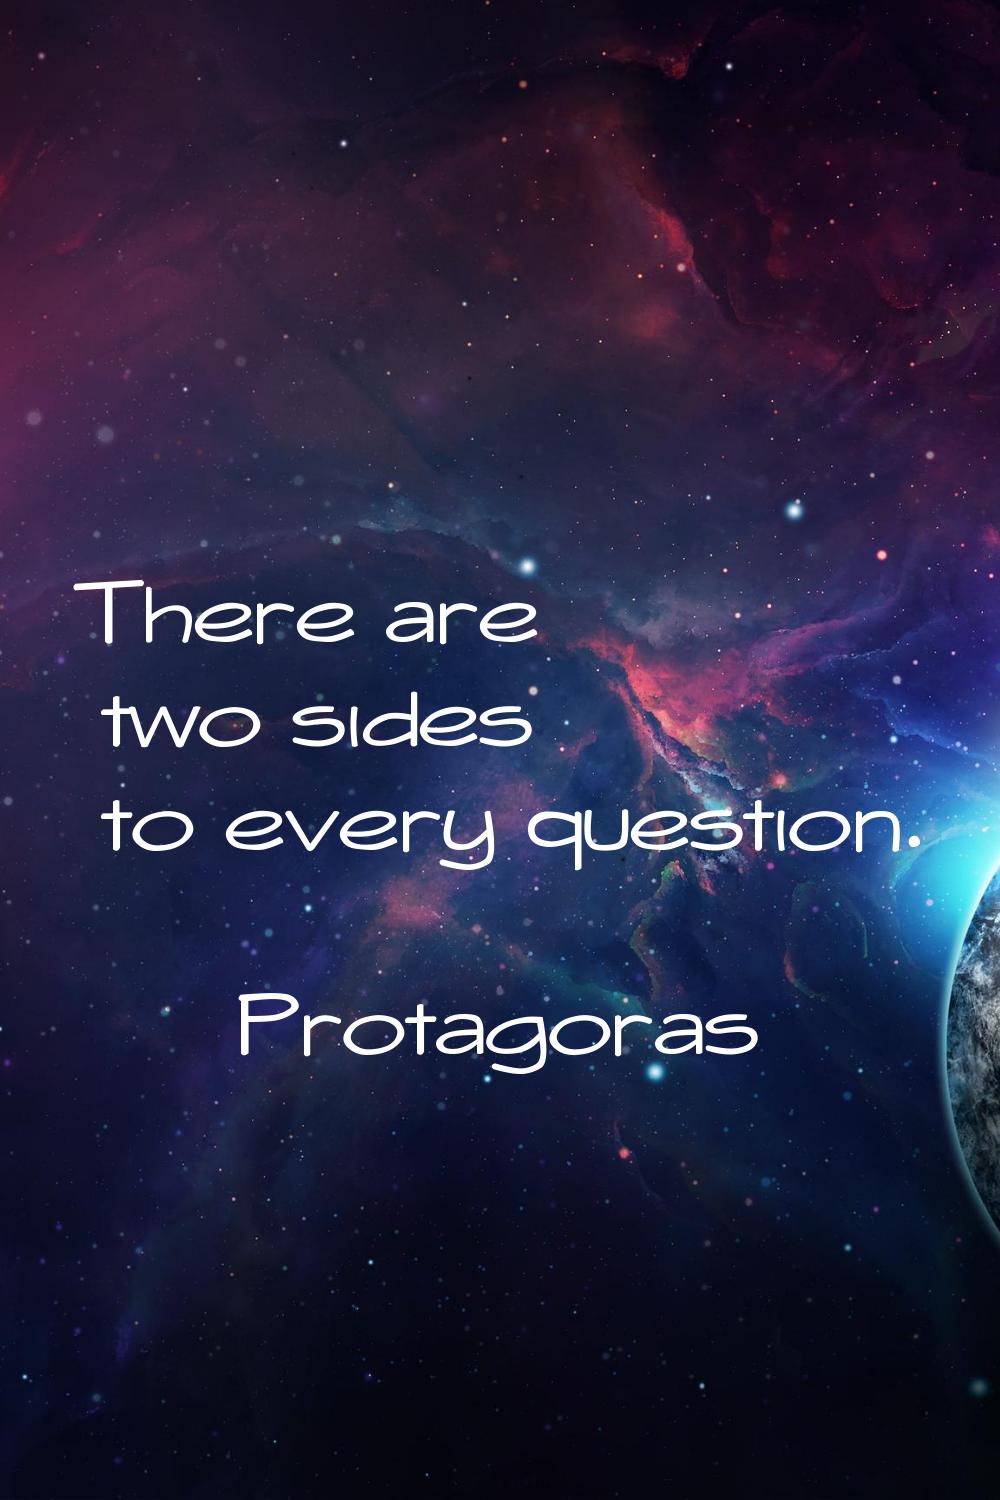 There are two sides to every question.